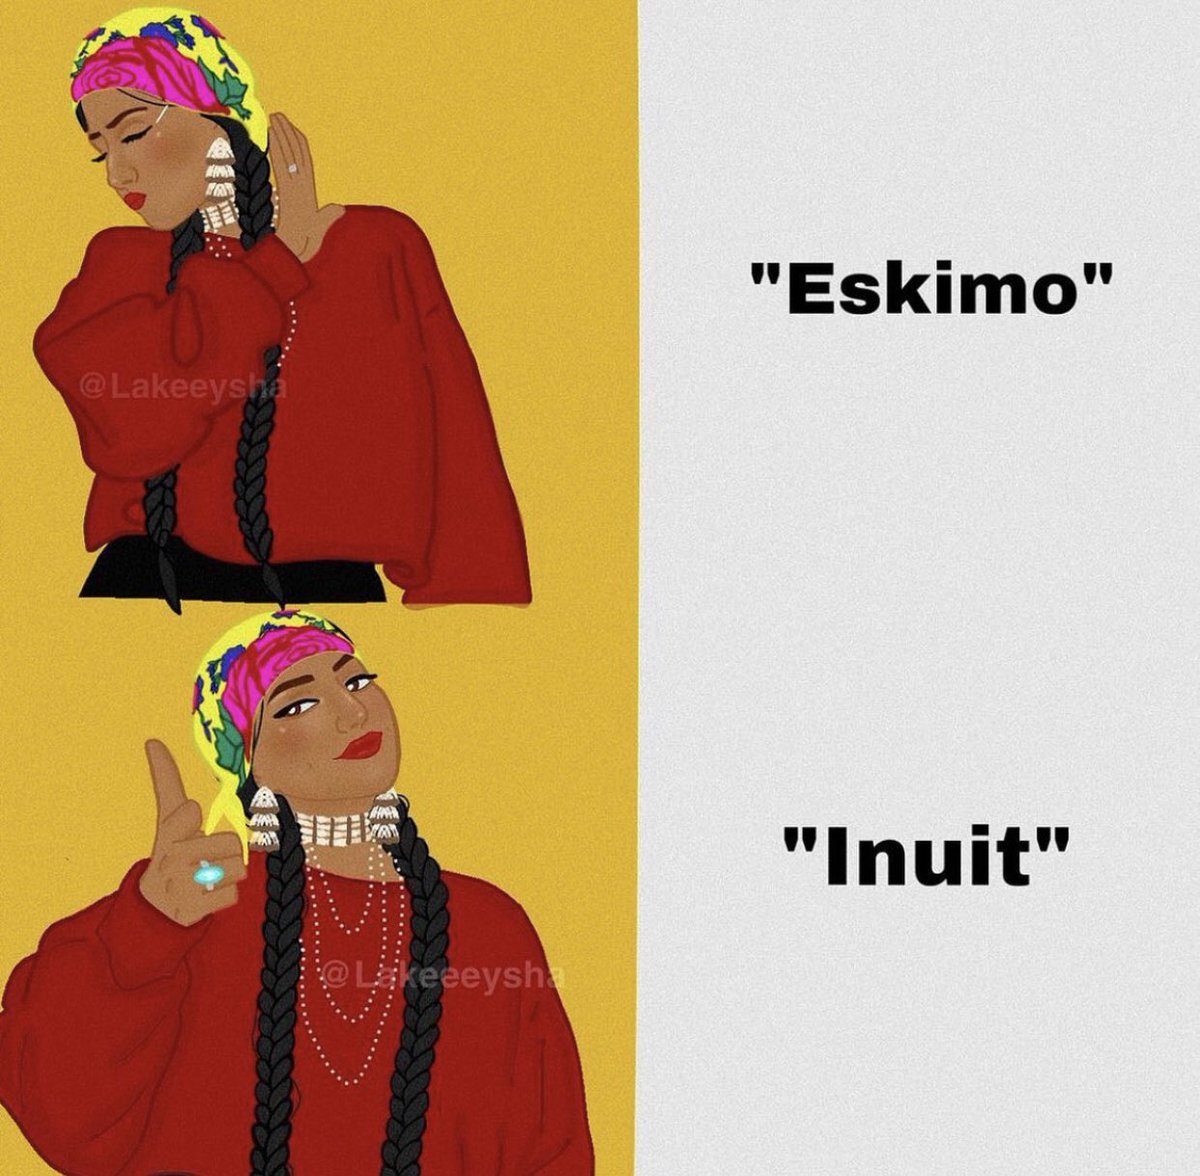 I want you to be a good Native ally so,

Inuk — singular 

Inuit — plural 

Please refrain from using the “E” word. The Inuit people aren’t very fond of it.